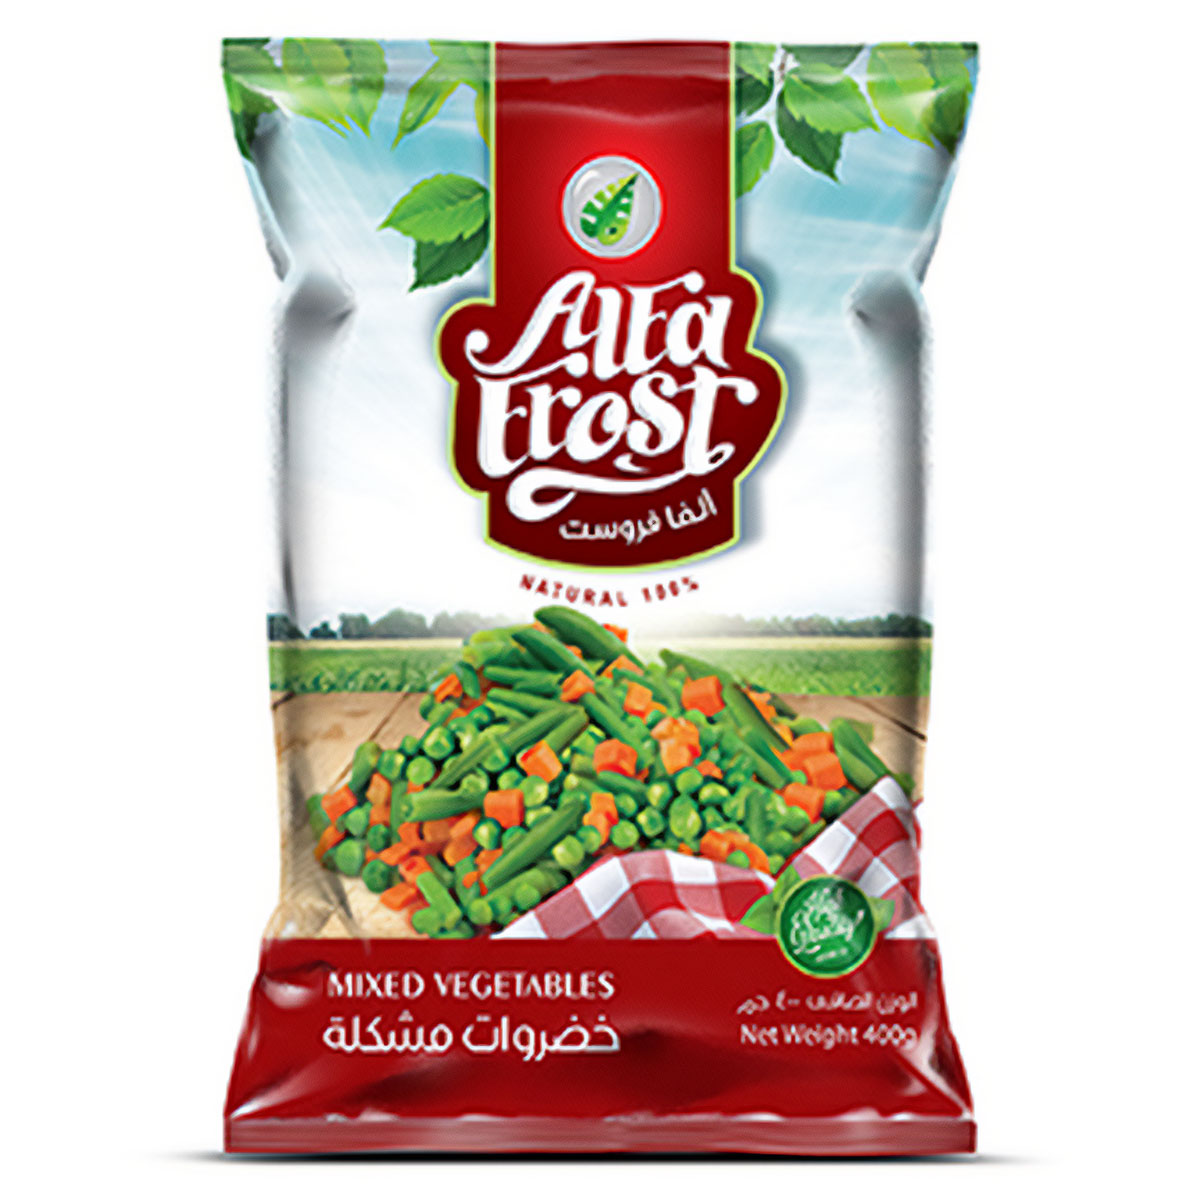 Alfa Frost - Mixed Vegetables - 400g - Continental Food Store